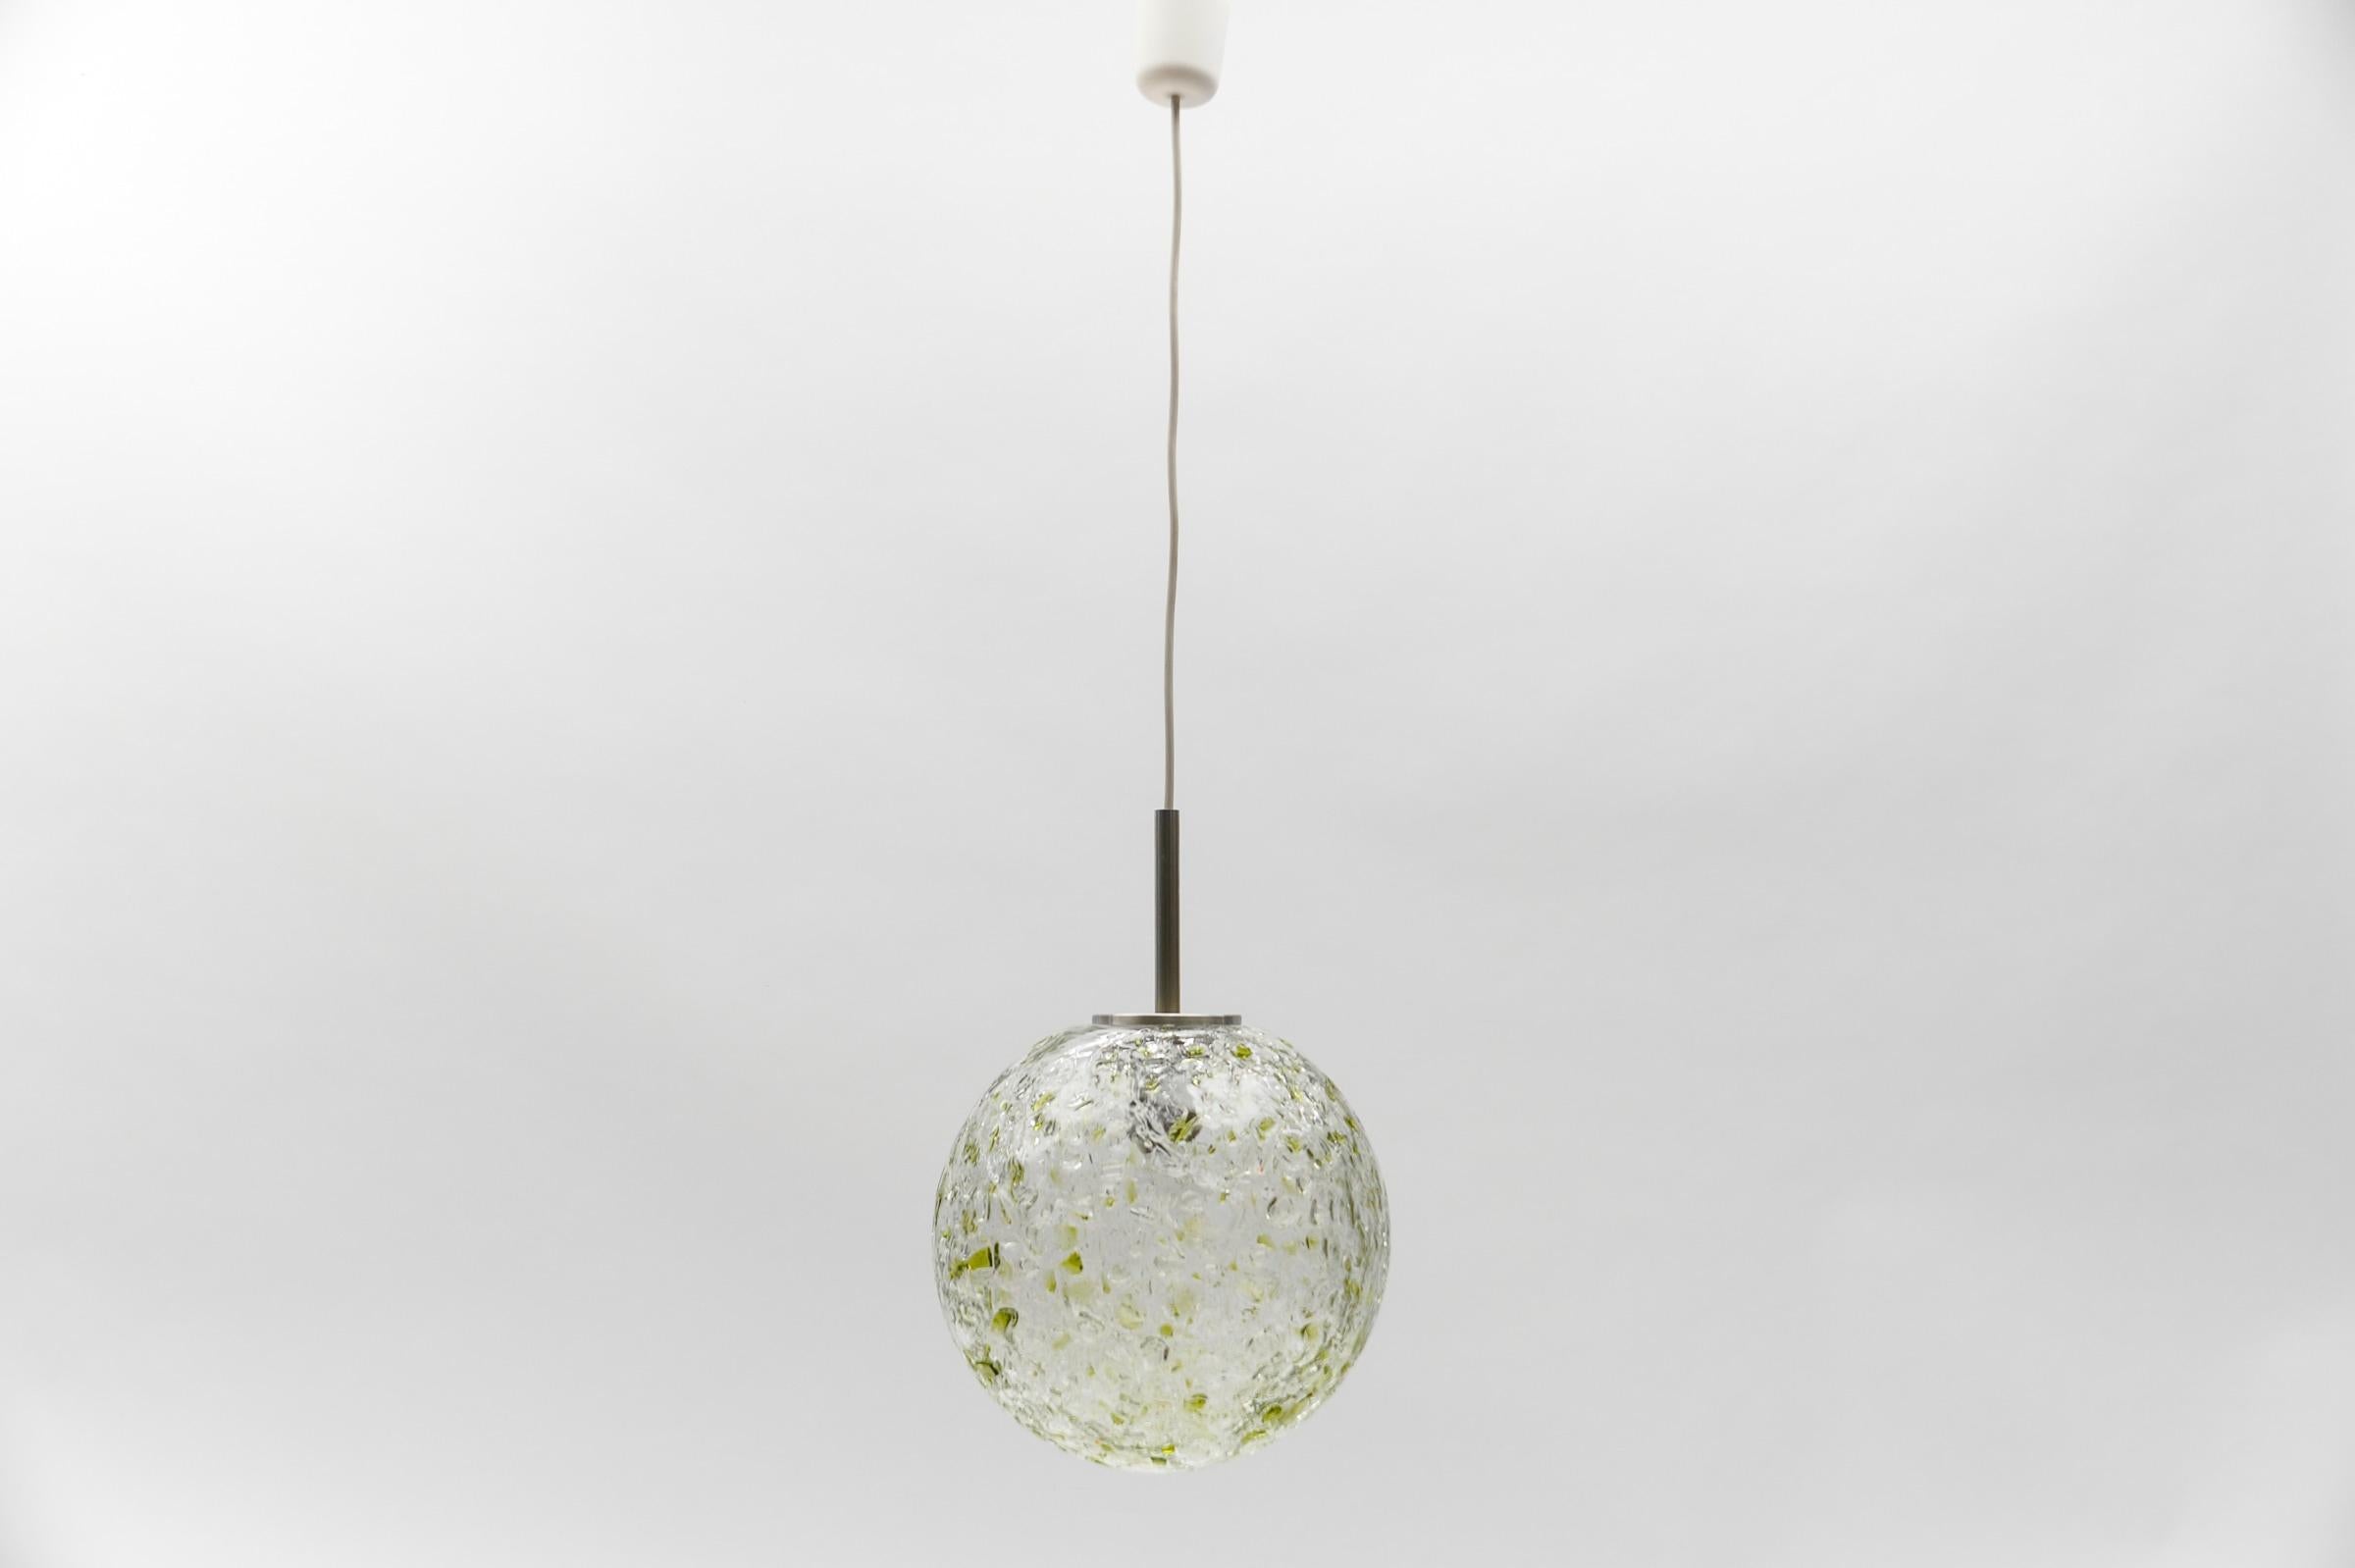 Green Massive Glass Ball Pendant Lamp by Doria, 1960s Germany

Dimensions
Diameter: 11.81 in. (30 cm)
Height: 41.33 in. (105 cm)

One E27 socket. Works with 220V and 110V.

Our lamps are checked, cleaned and are suitable for use in the USA.